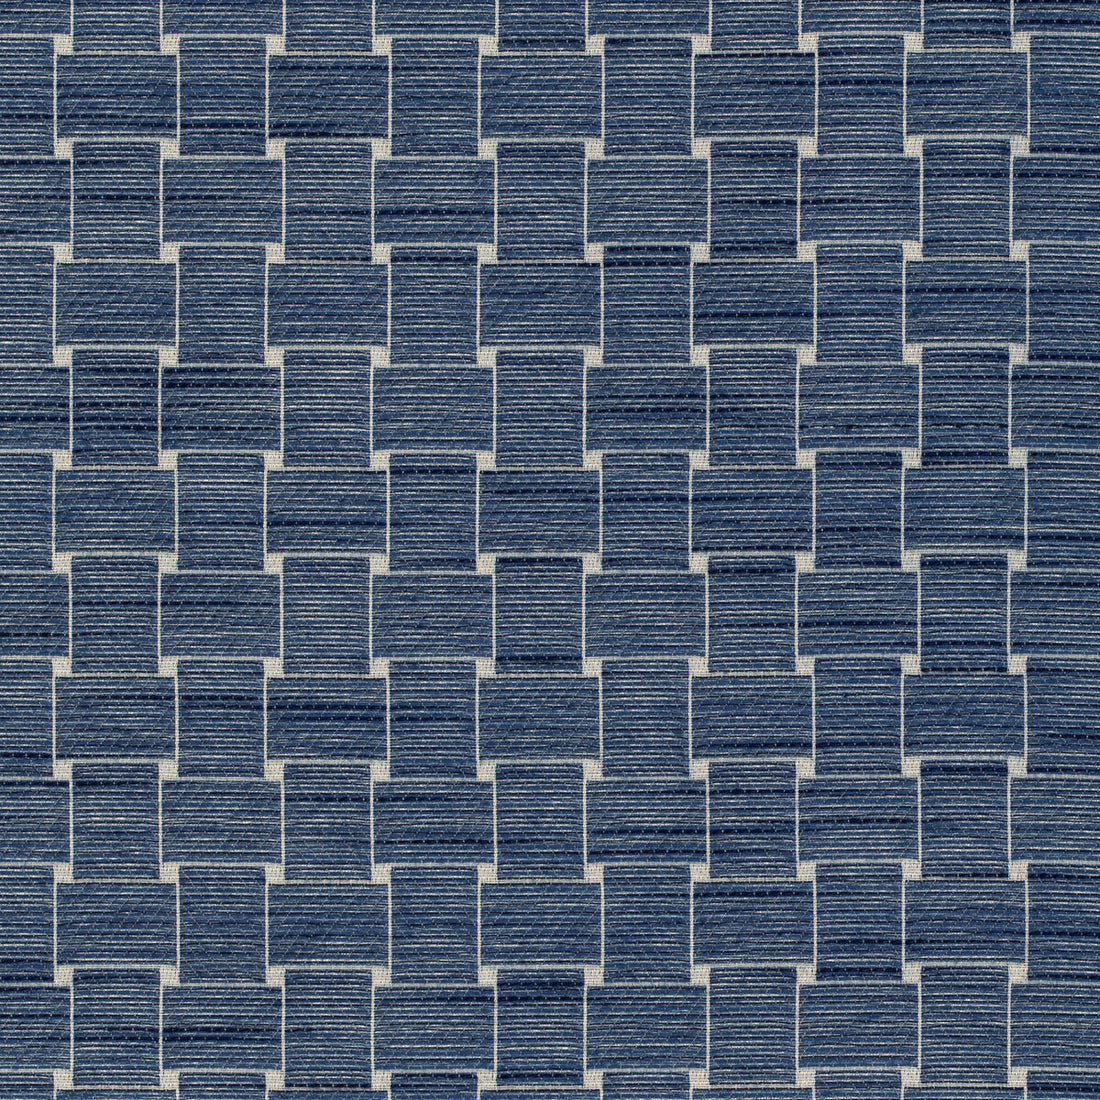 Beaumois Woven fabric in navy color - pattern 8020108.50.0 - by Brunschwig &amp; Fils in the Granville Weaves collection